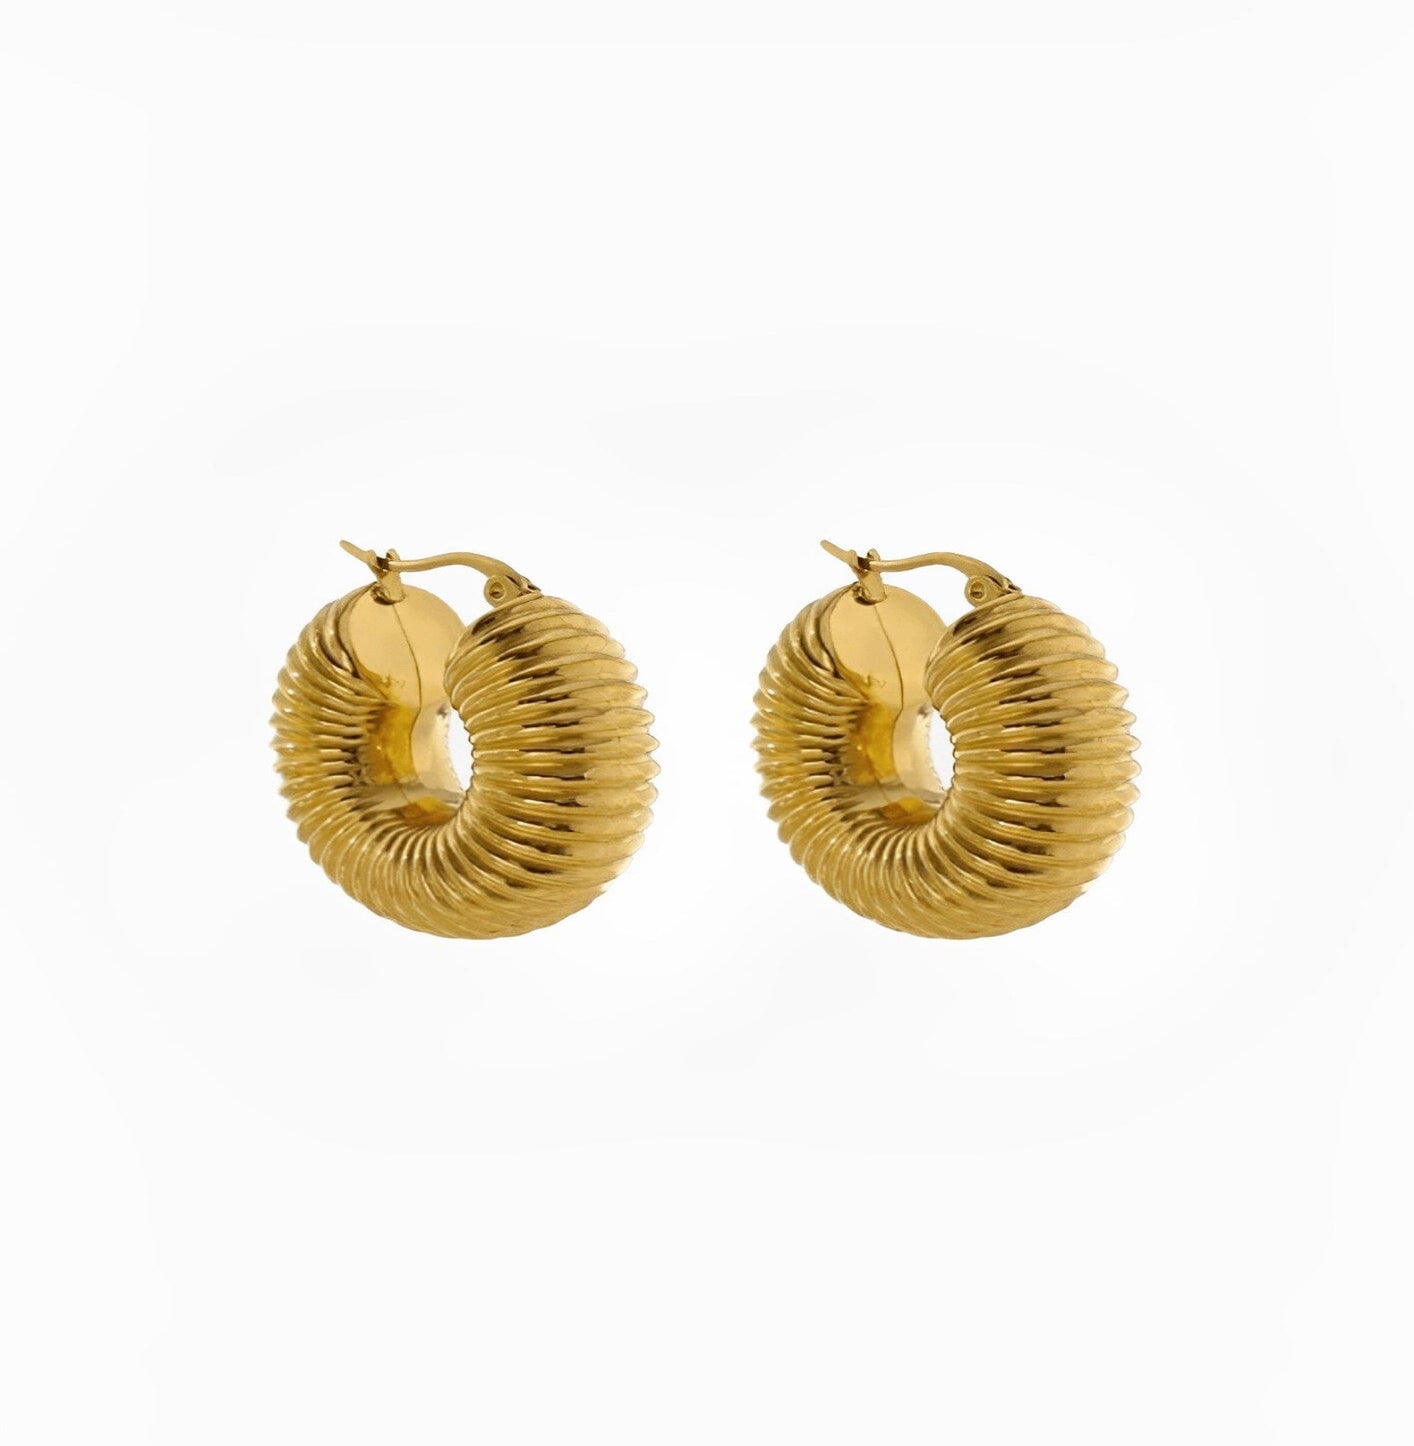 AVGO EARRINGS earing Yubama Jewelry Online Store - The Elegant Designs of Gold and Silver ! 